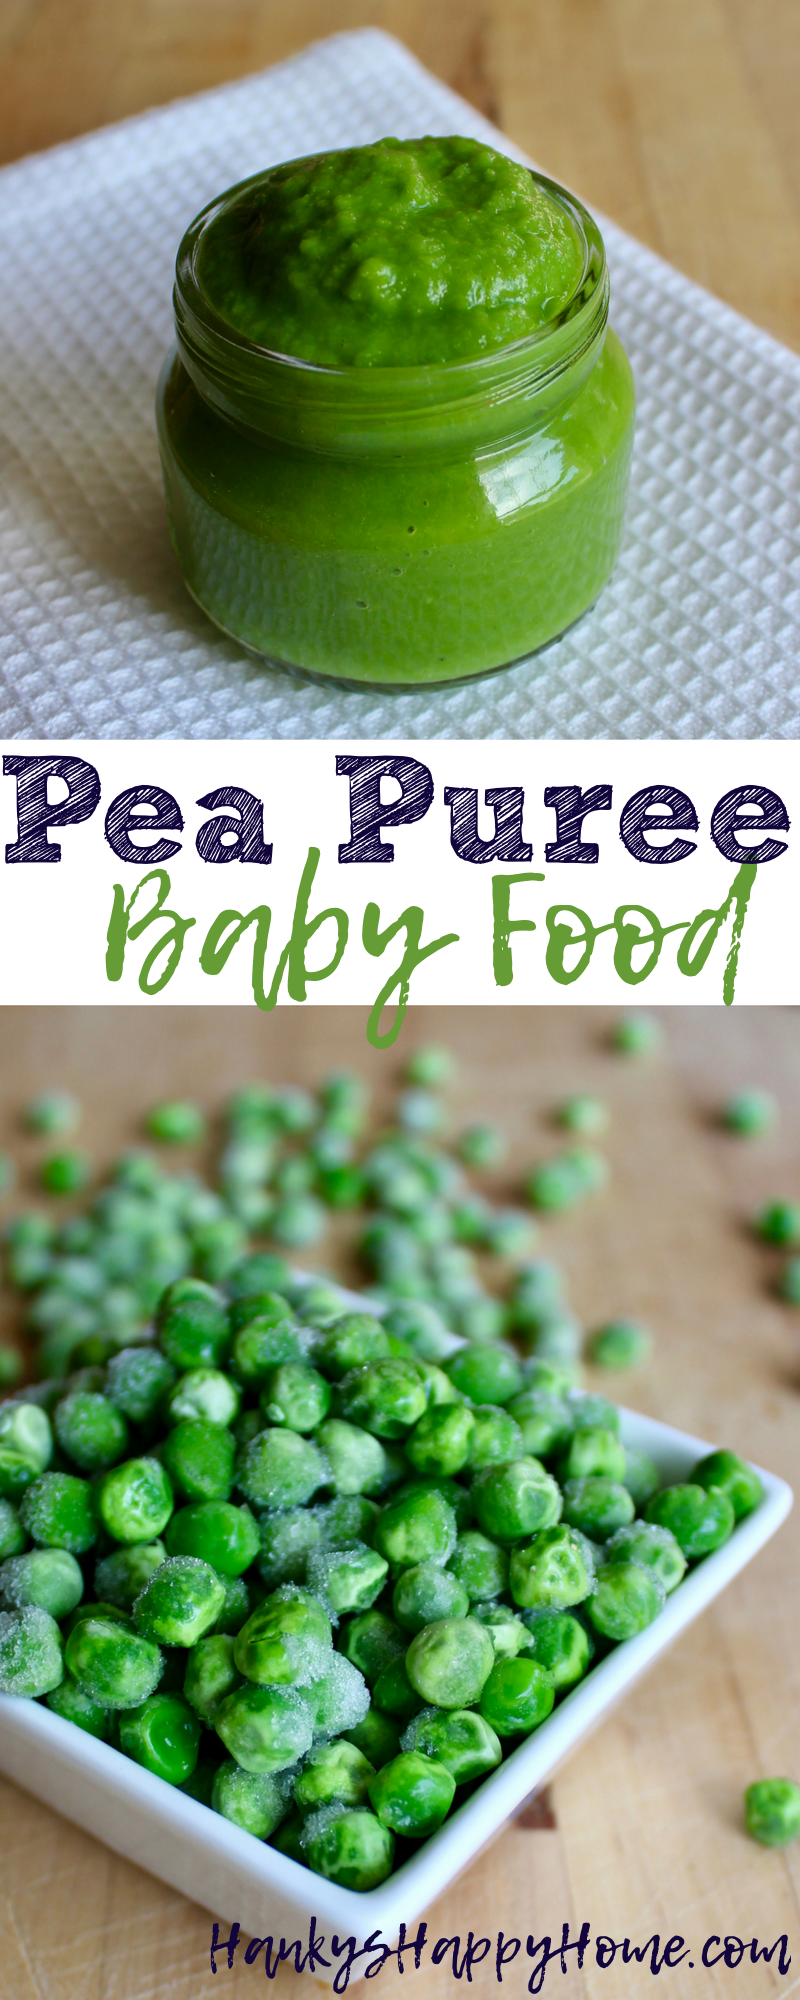 Quick and easy pea baby food puree with a sweet taste babies love. Excellent source of vitamin C and a good source of fiber, folate, and iron.